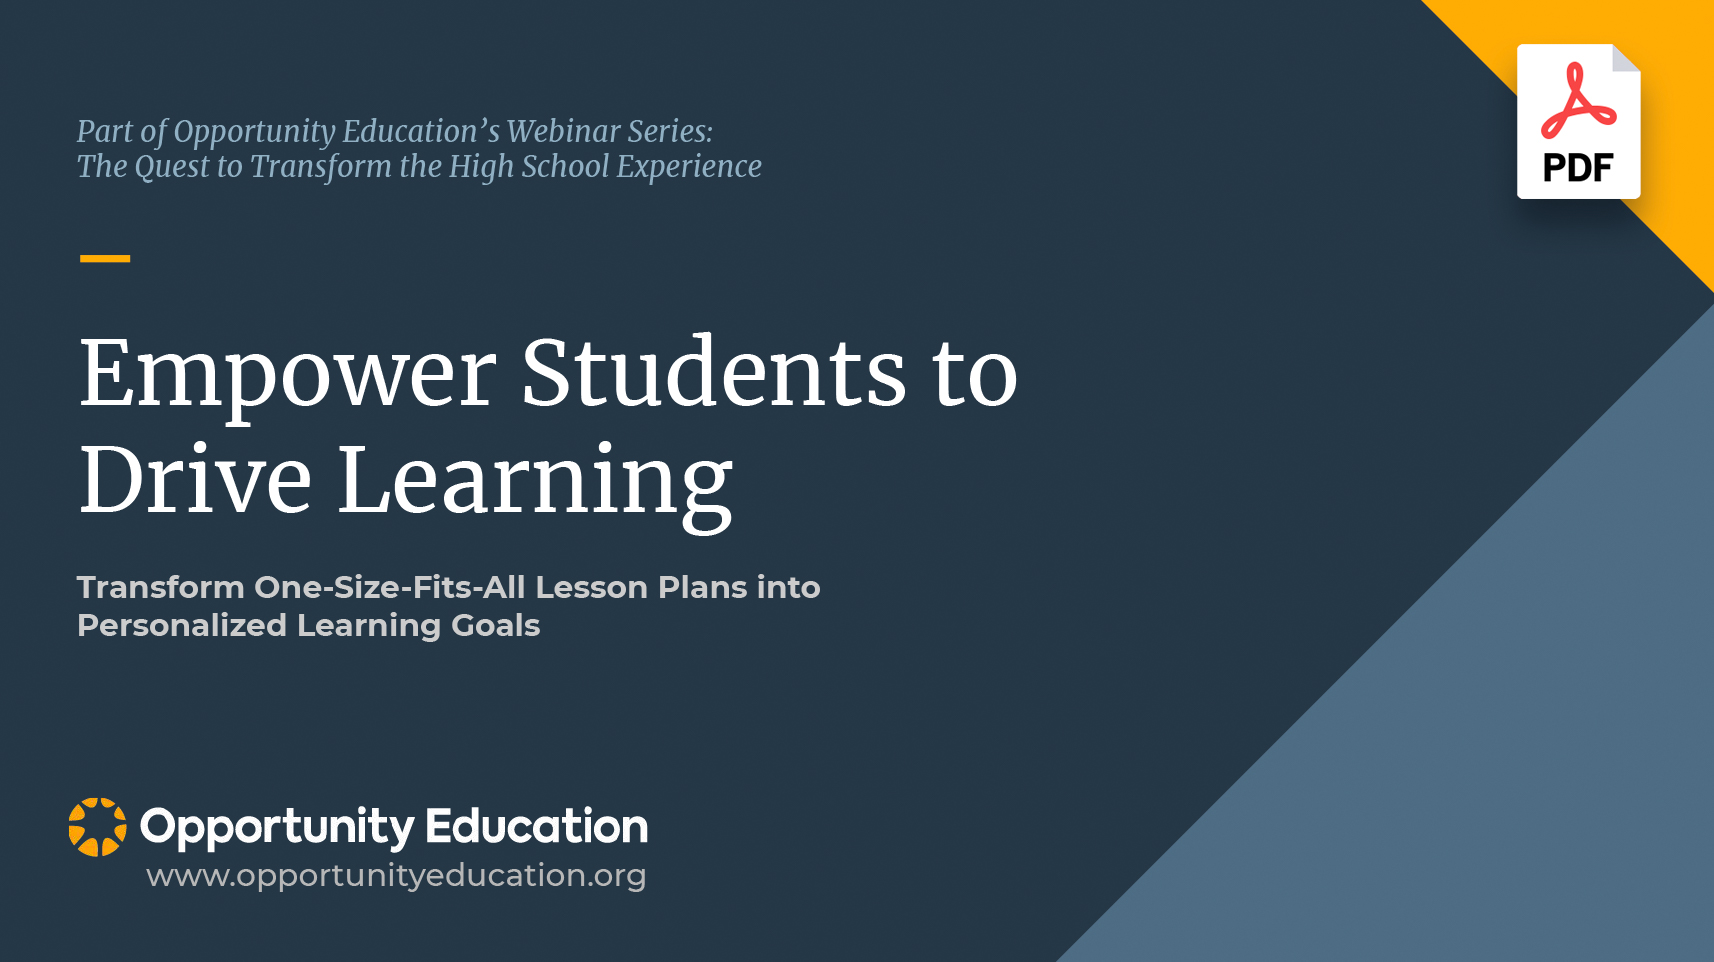 The cover of the slide deck for OE's goal setting webinar, "Empower Students to Drive Learning."